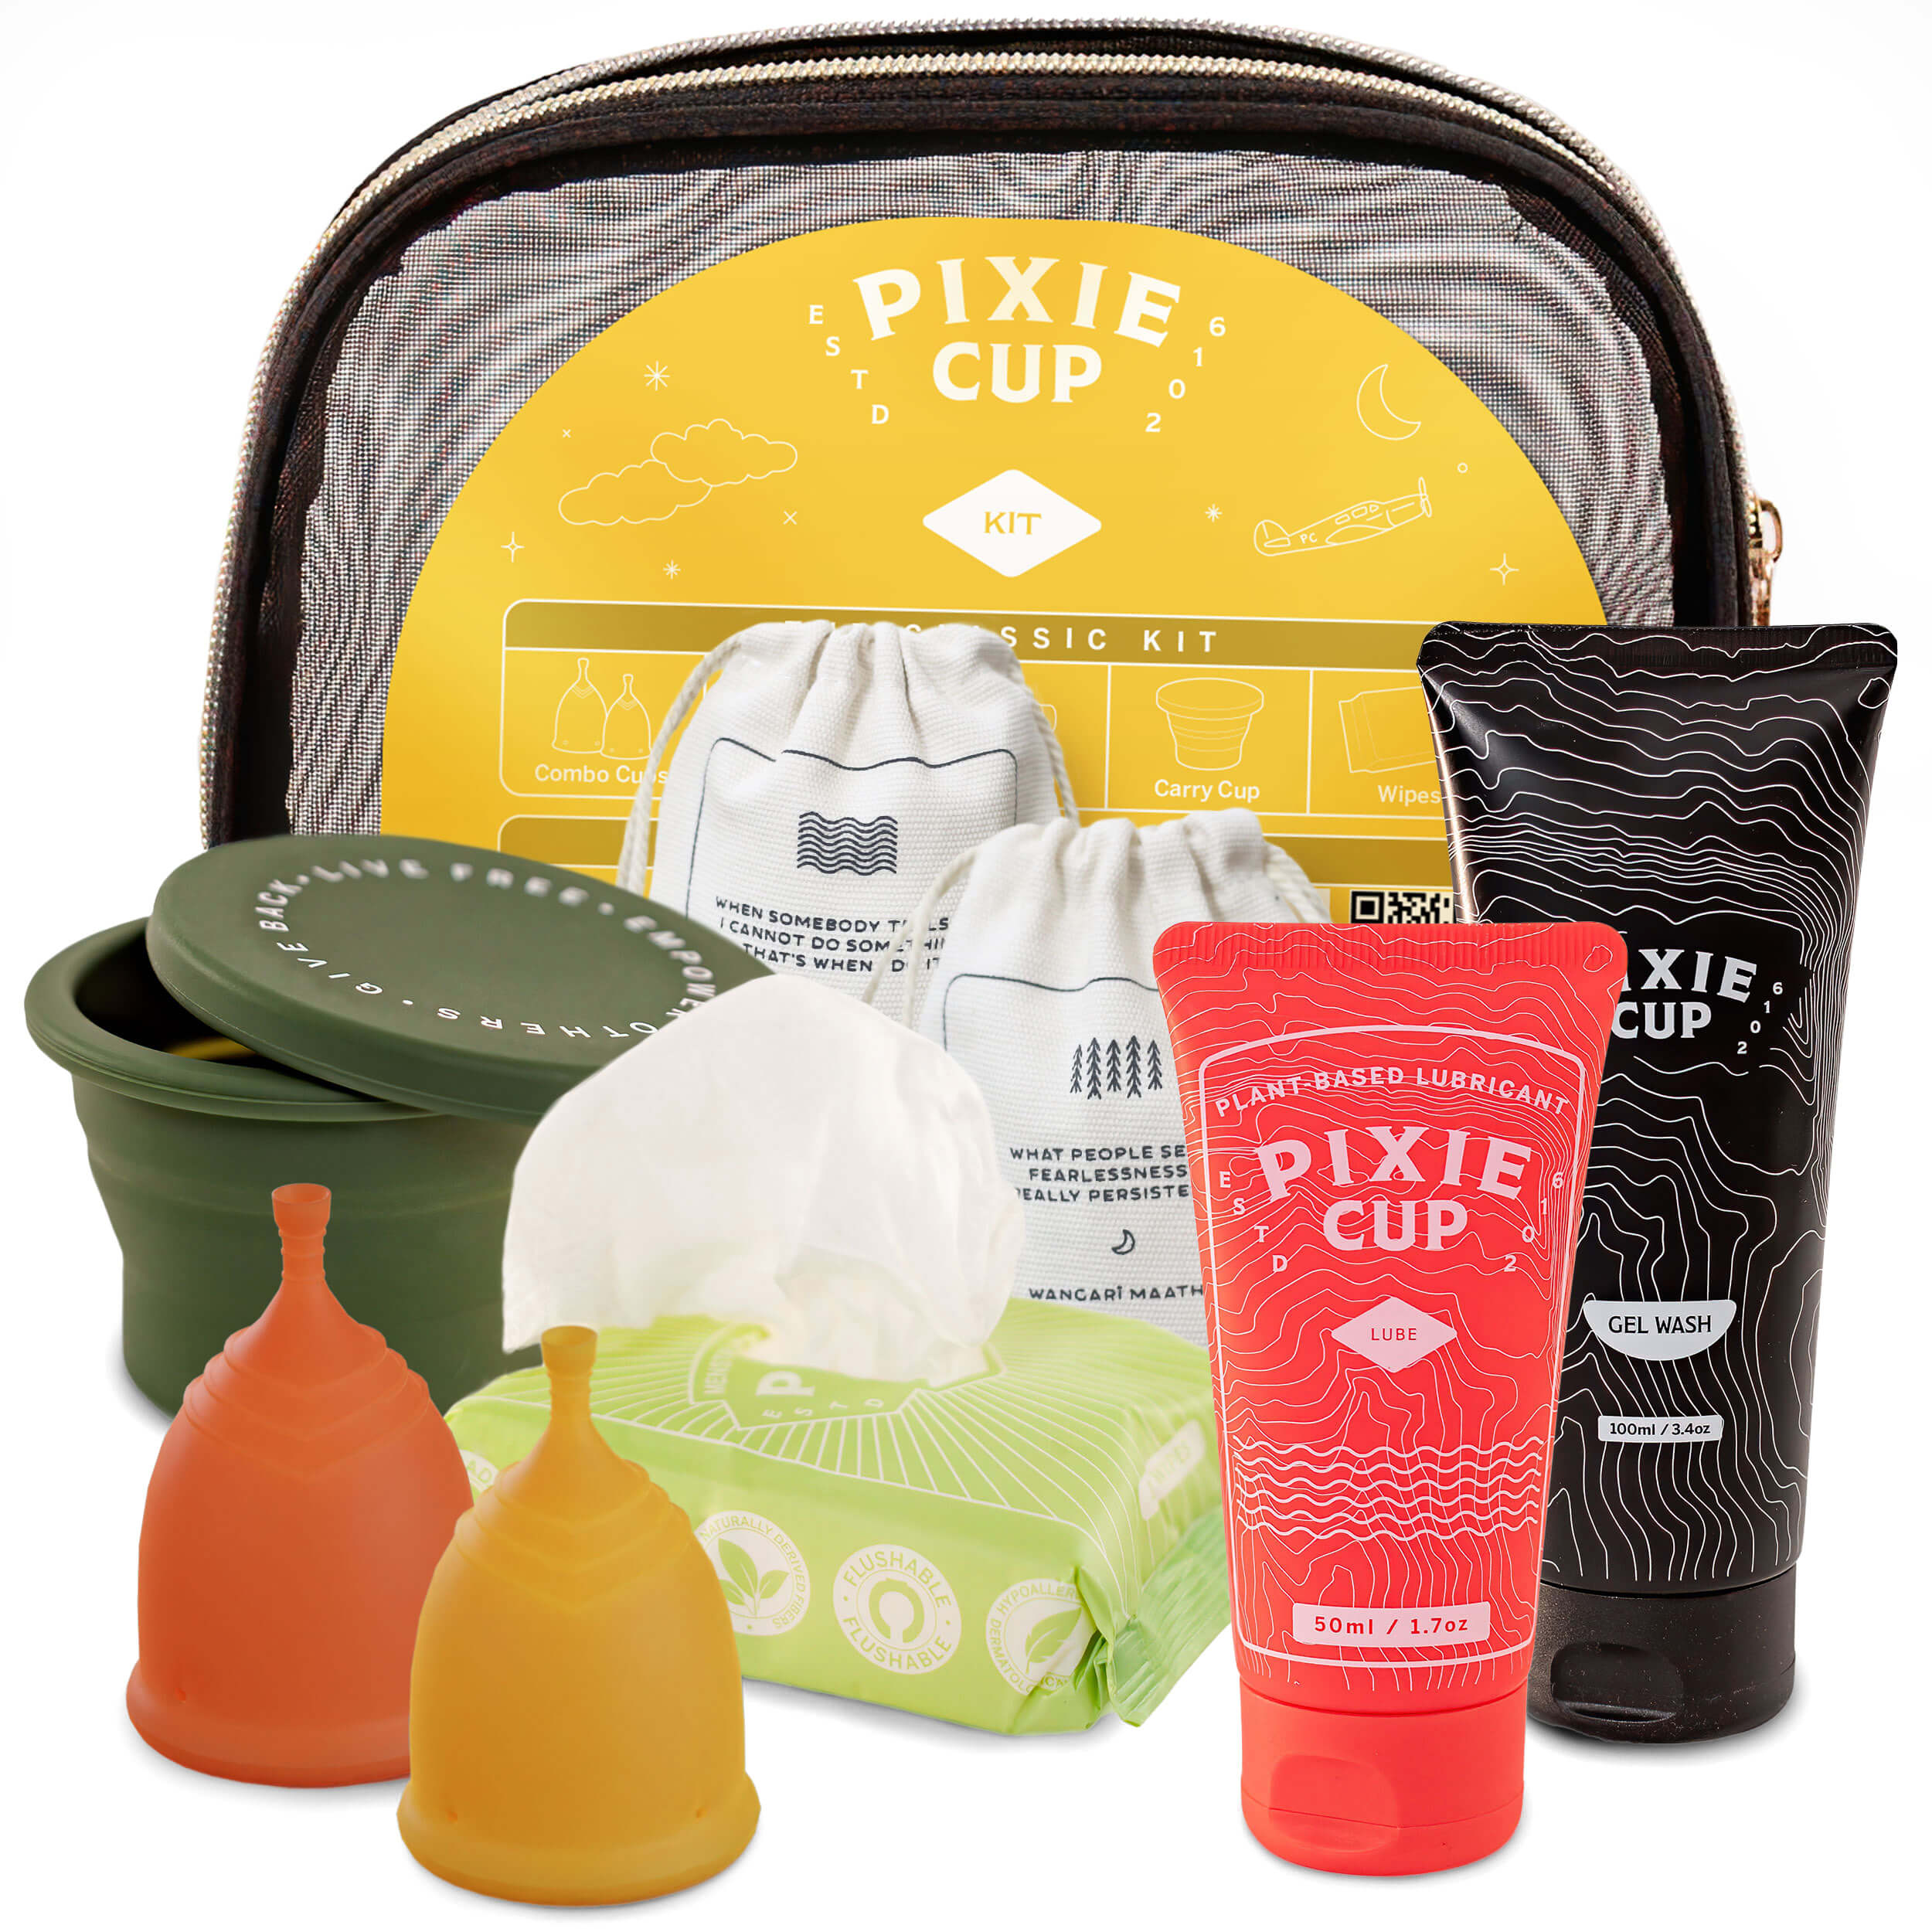  Pixie Cup Menstrual Cup Cleaner Kit - Sterilizer Wash